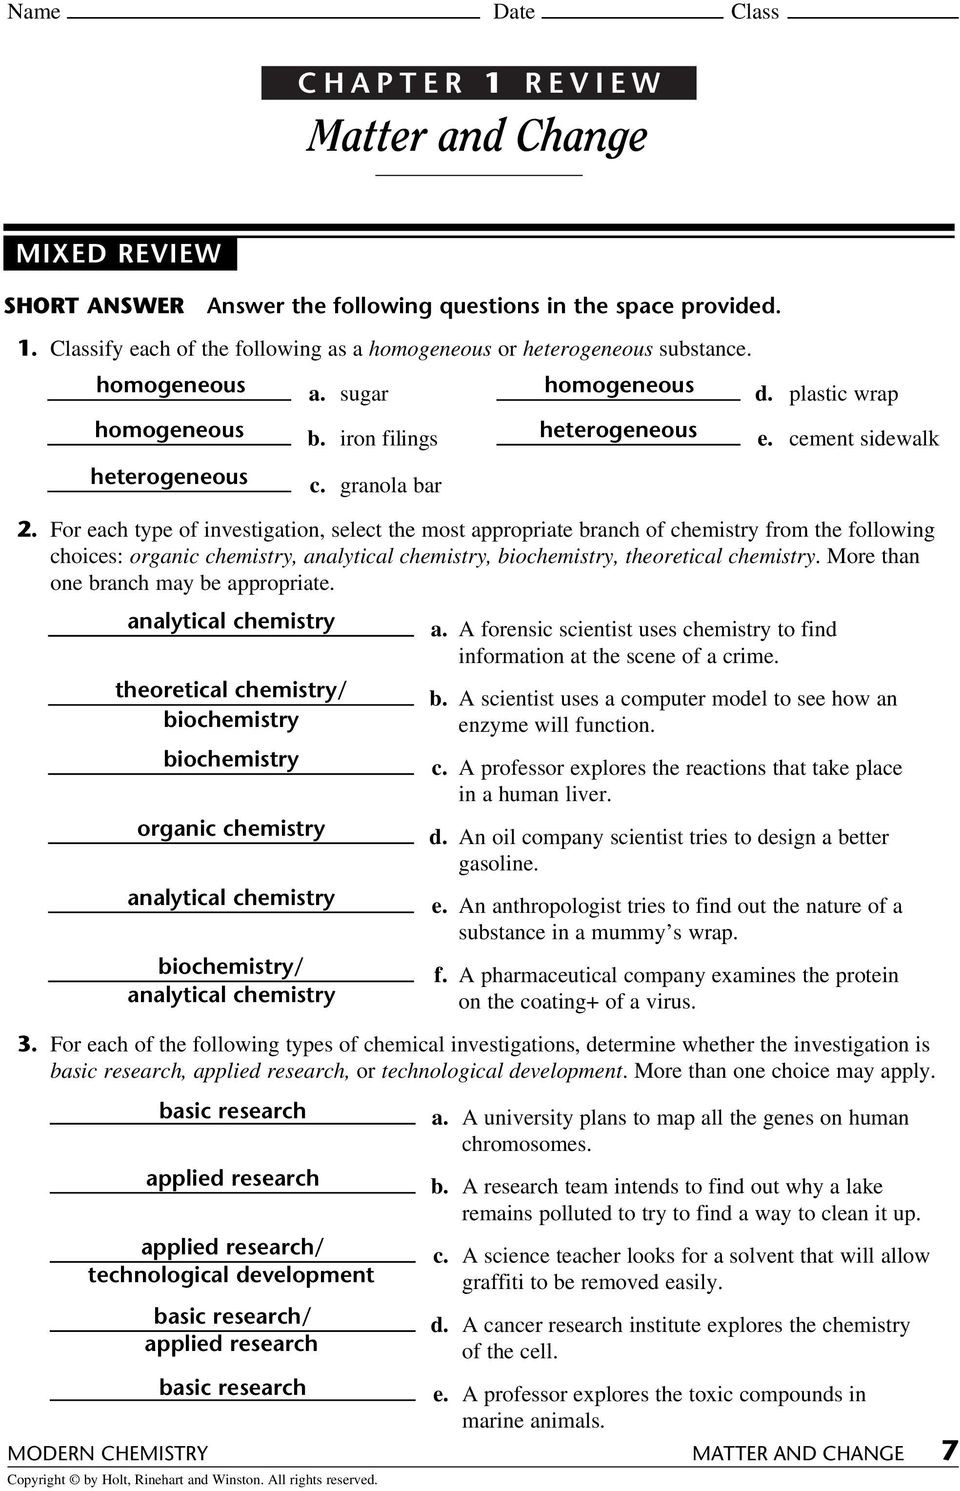 Chemistry Worksheet Matter 1 Answers Name Date Class Chapter 1 Review Answer the Following